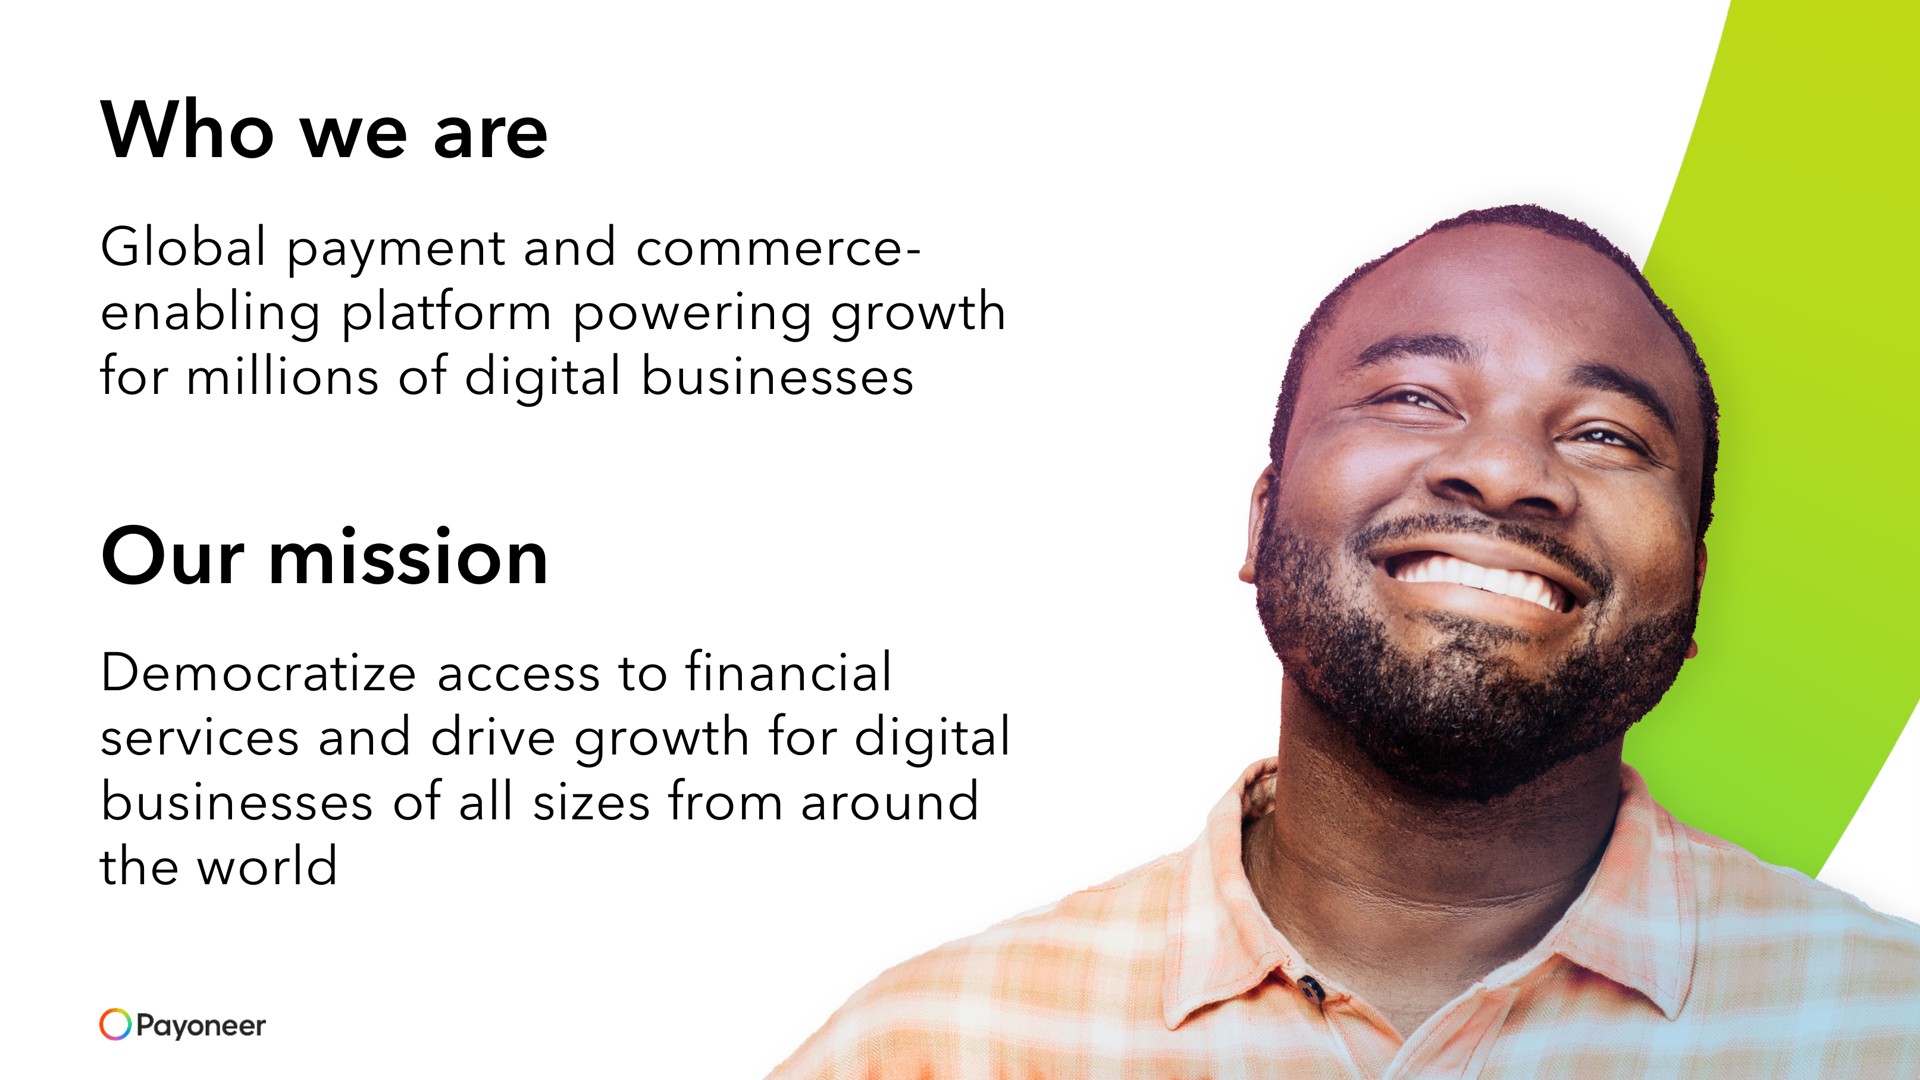 who we are global payment and commerce enabling platform powering growth for millions of digital businesses our mission democratize access to financial services and drive growth for digital businesses of all sizes from around the world | Payoneer